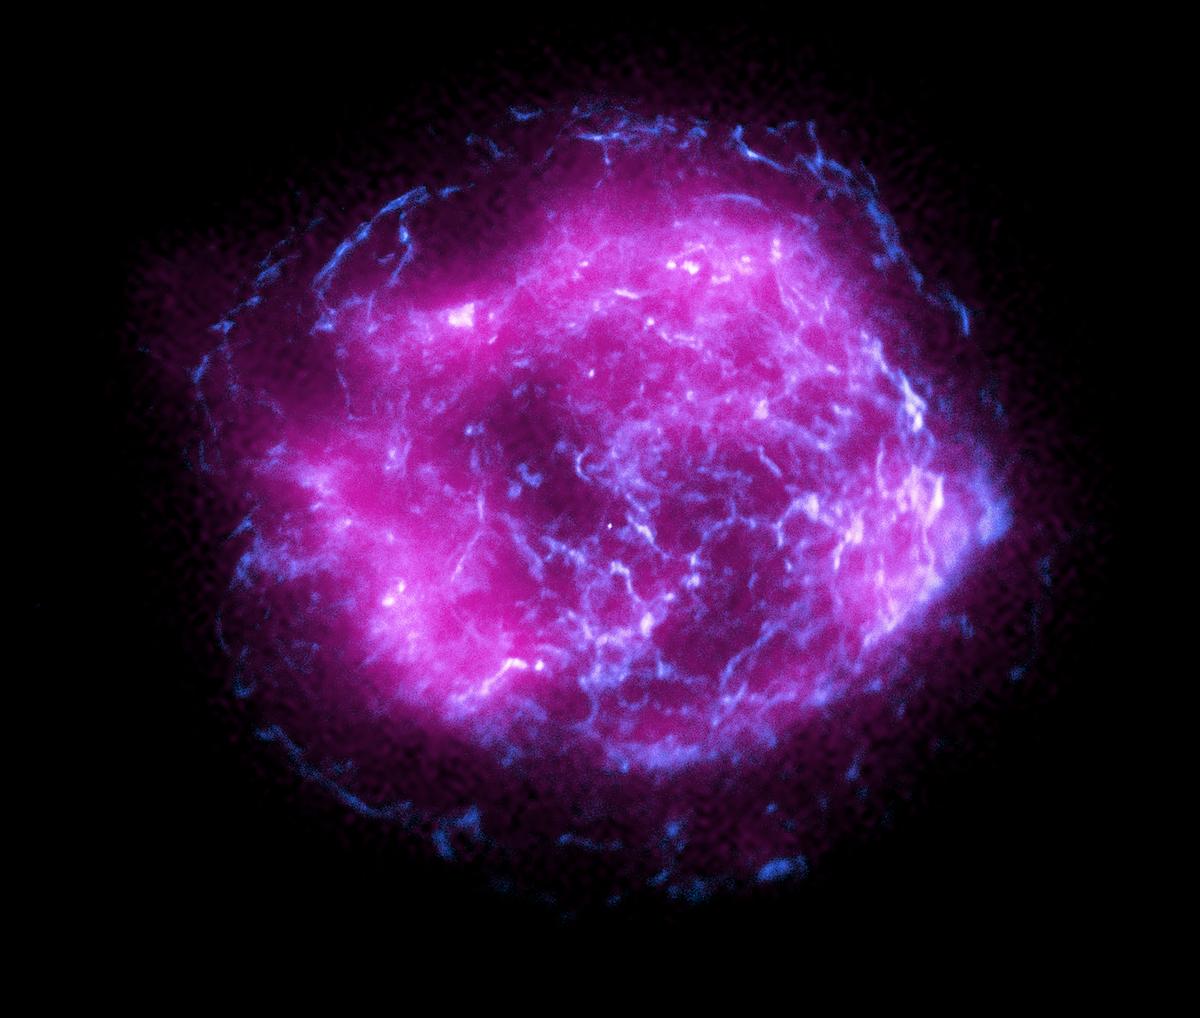 A newly released image of supernova remnant Cassiopeia A combines some of the first X-ray data collected by NASA’s IXPE, shown in magenta, with high-energy X-ray data from NASA’s Chandra X-Ray Observatory, in blue. (<a href="https://www.nasa.gov/sites/default/files/thumbnails/image/chandra_ixpe_v3magentahires.jpg">NASA/CXC/SAO/IXPE</a>)